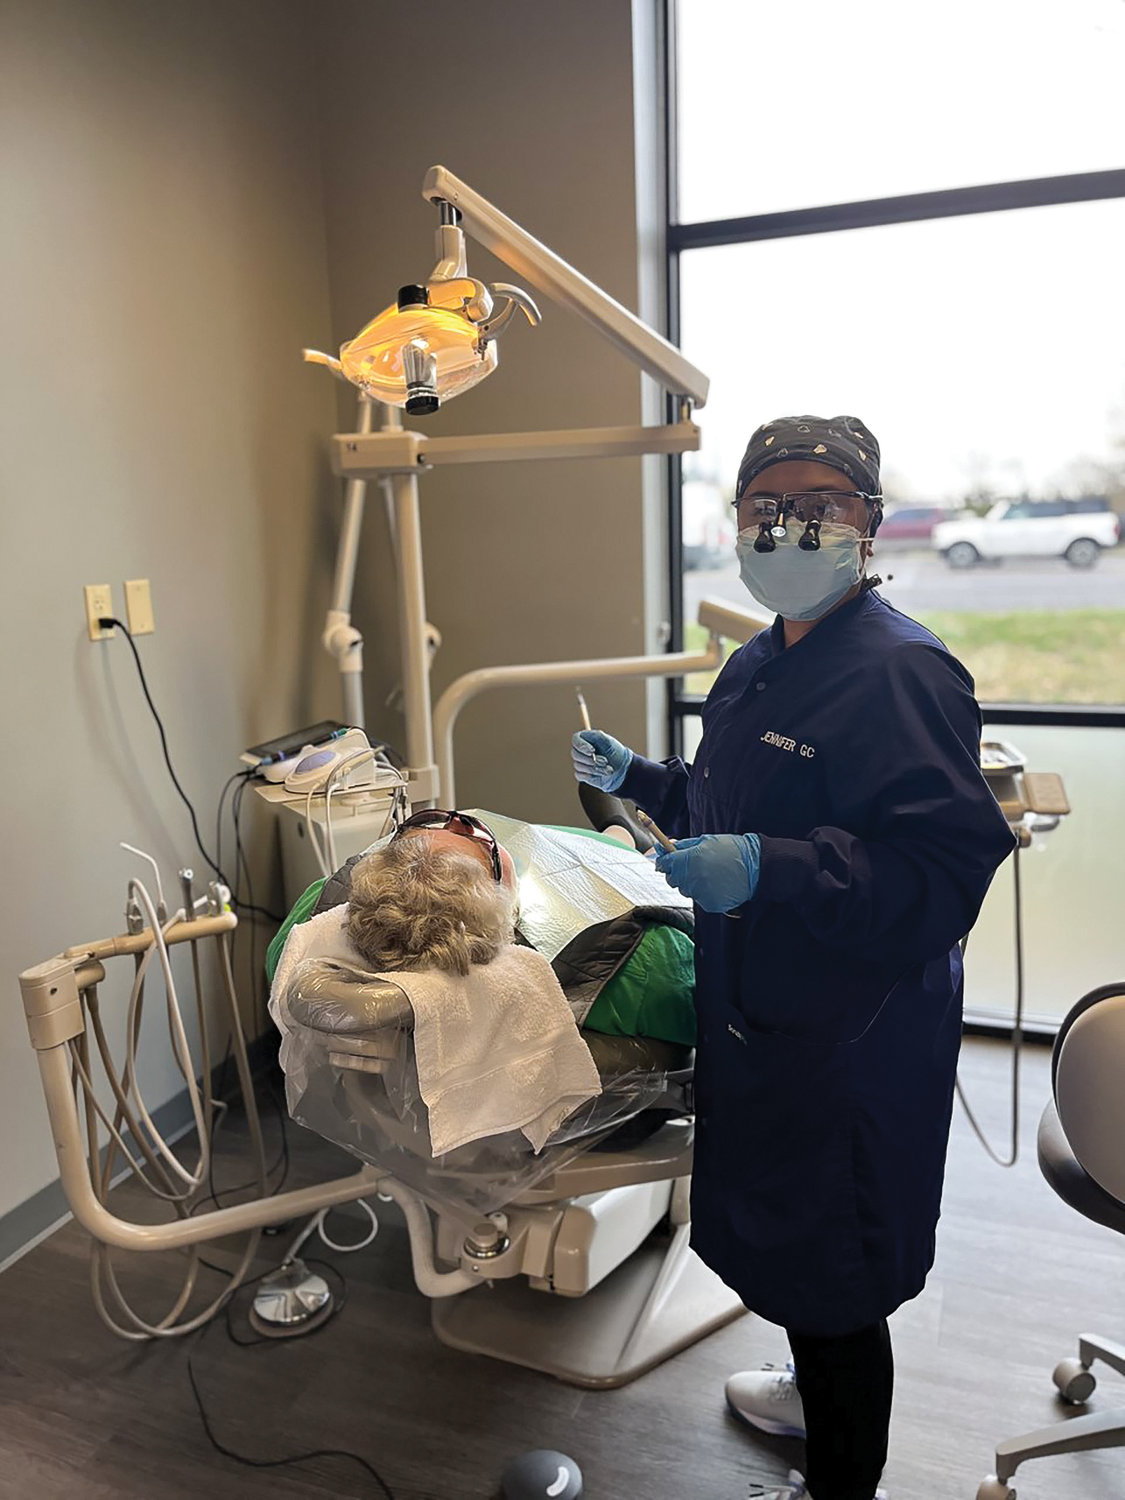 Battle Ground HealthCare has partnered with the dental hygiene program at Clark College to provide students with hands-on experience in a clinic setting.